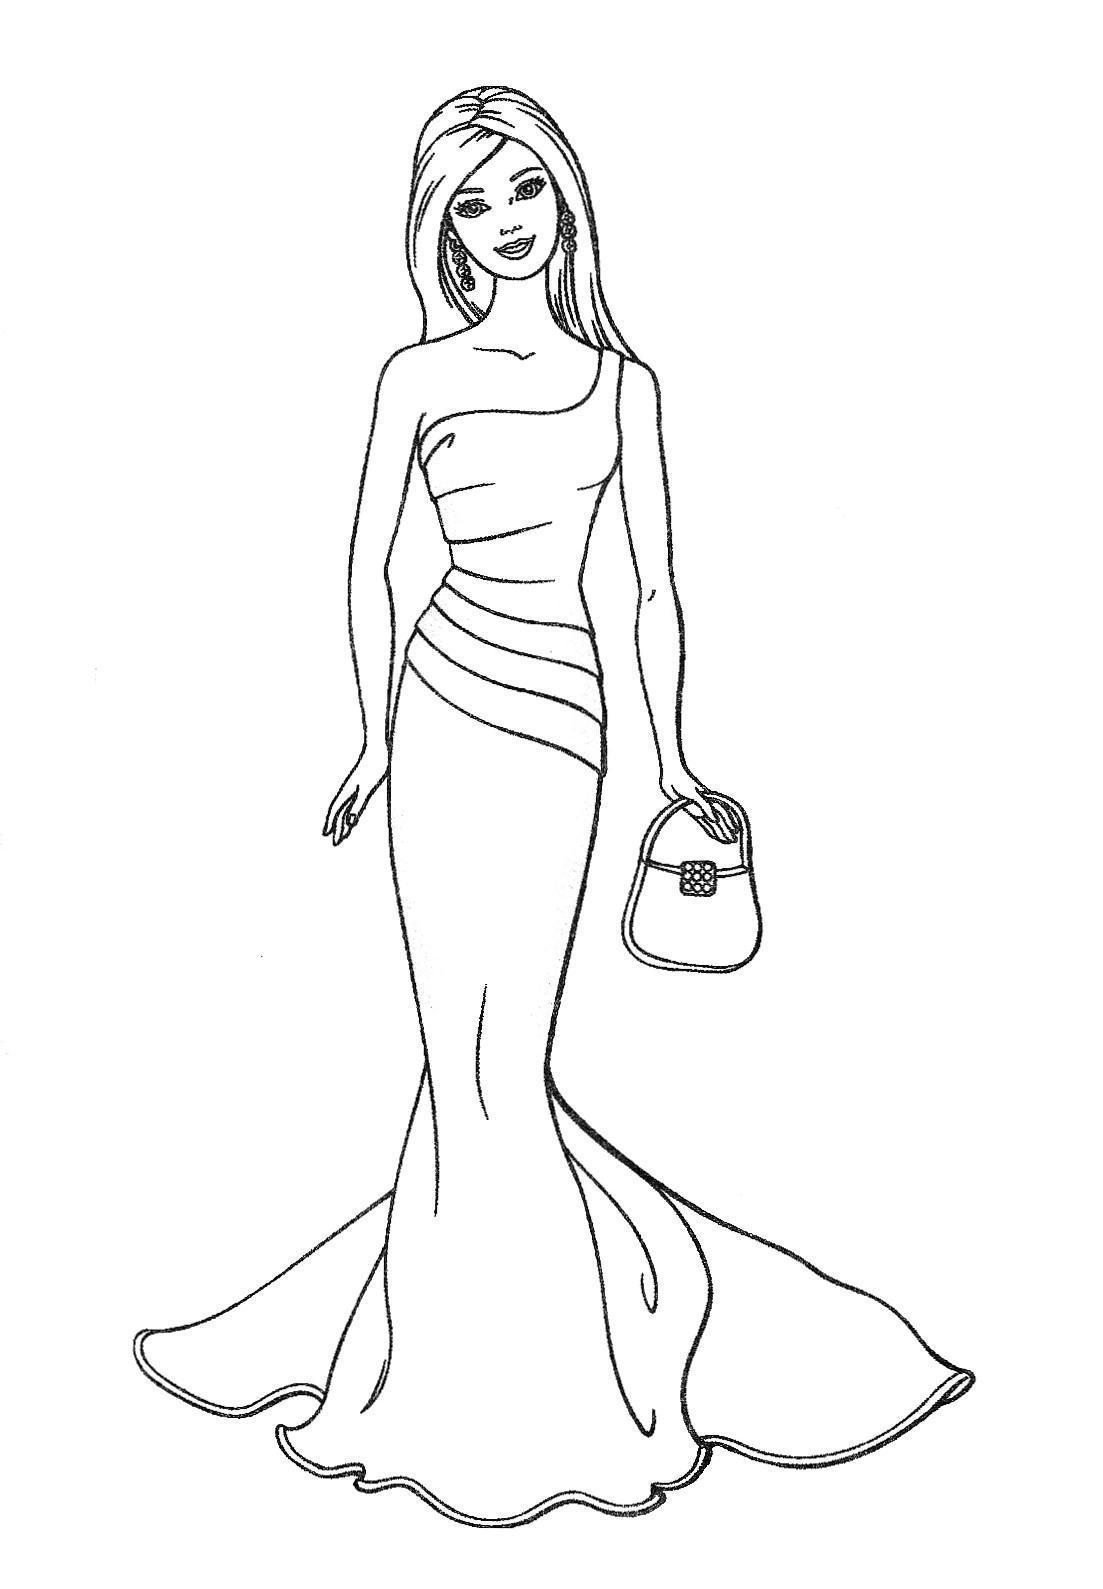 Barbie to color for children  Barbie Kids Coloring Pages